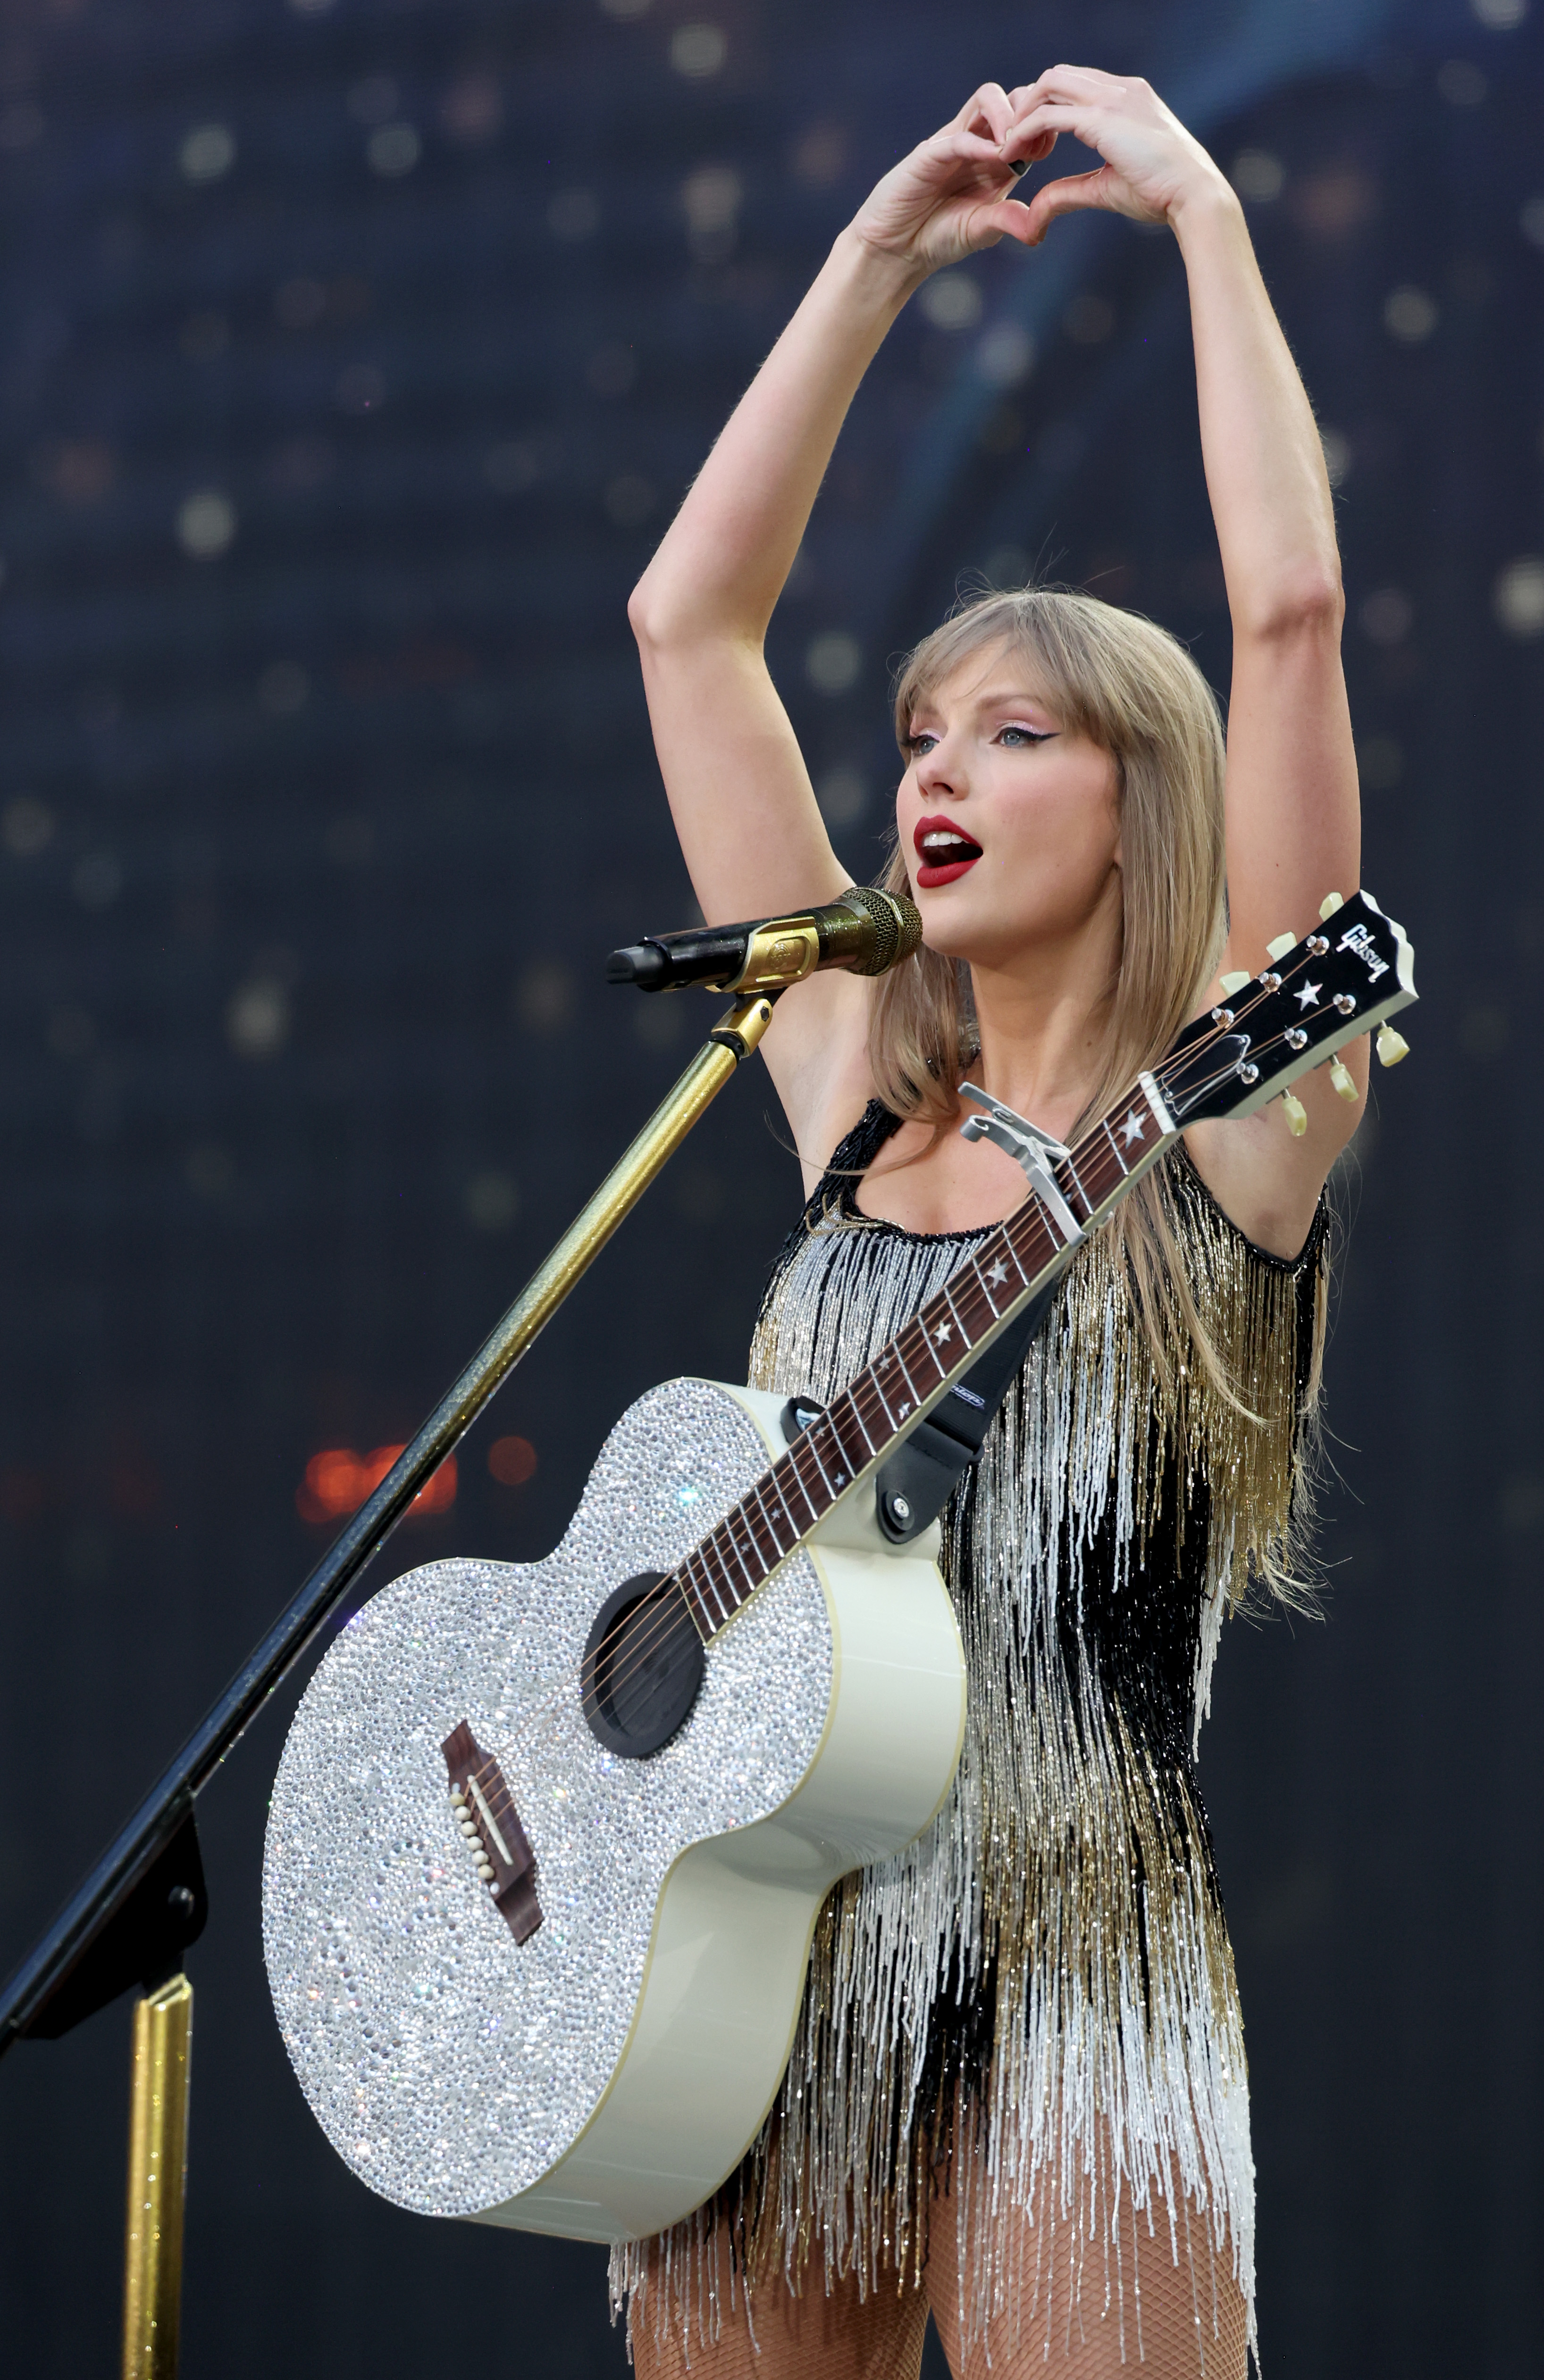 Taylor Swift performs on stage holding a sparkly white guitar, wearing a fringed outfit, and making a heart shape with her hands above her head